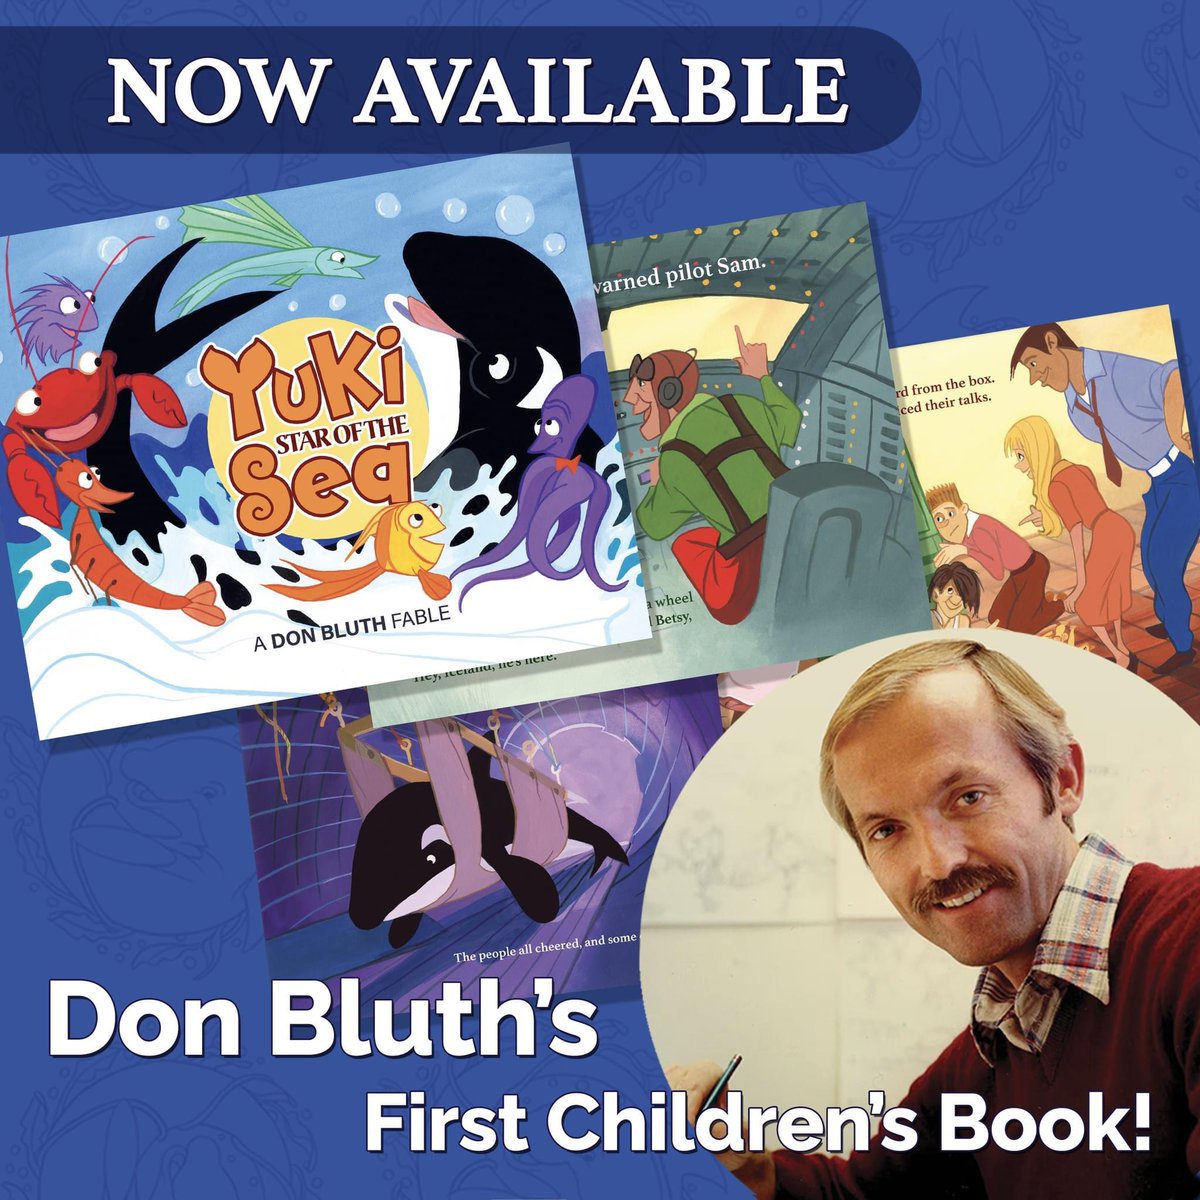 #donbluth Cute new book series by Don 😁👌👍!